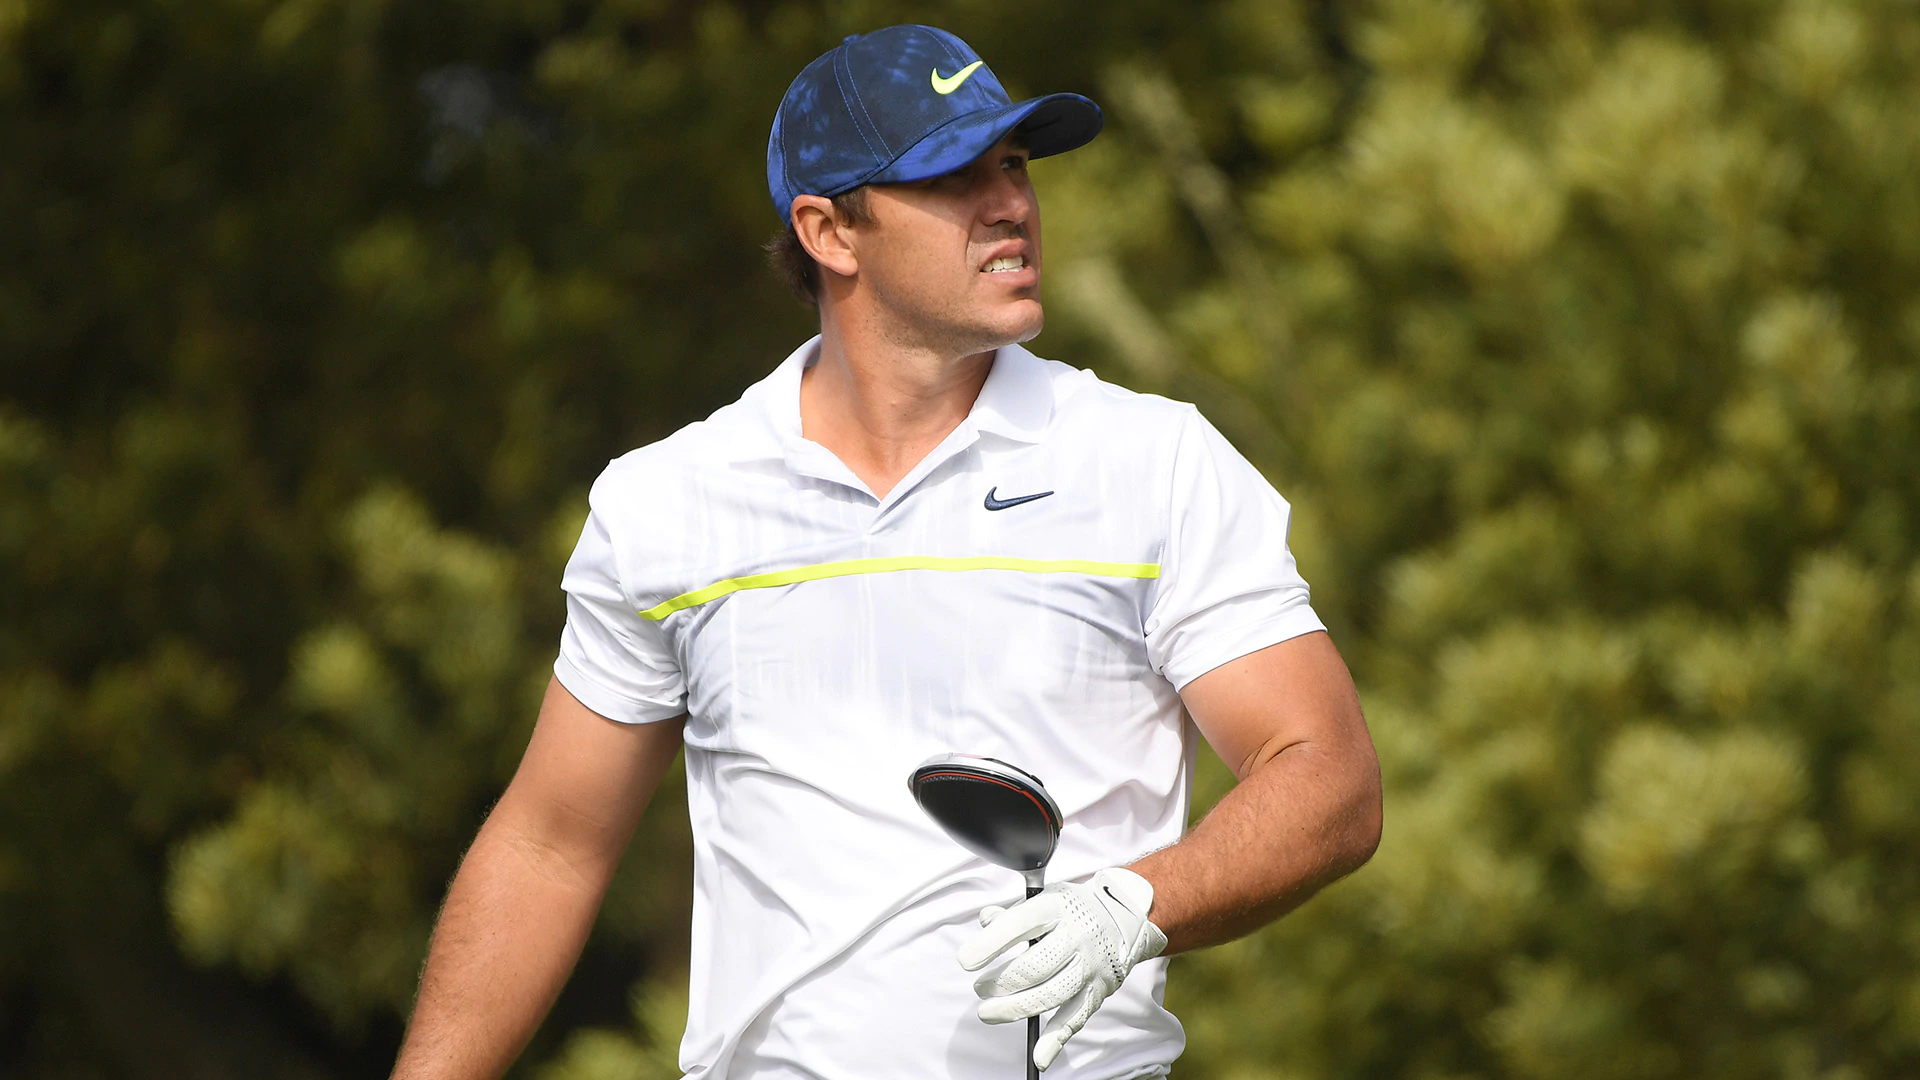 Brooks Koepka lays down in rough, has trainer stretch out his ailing left leg